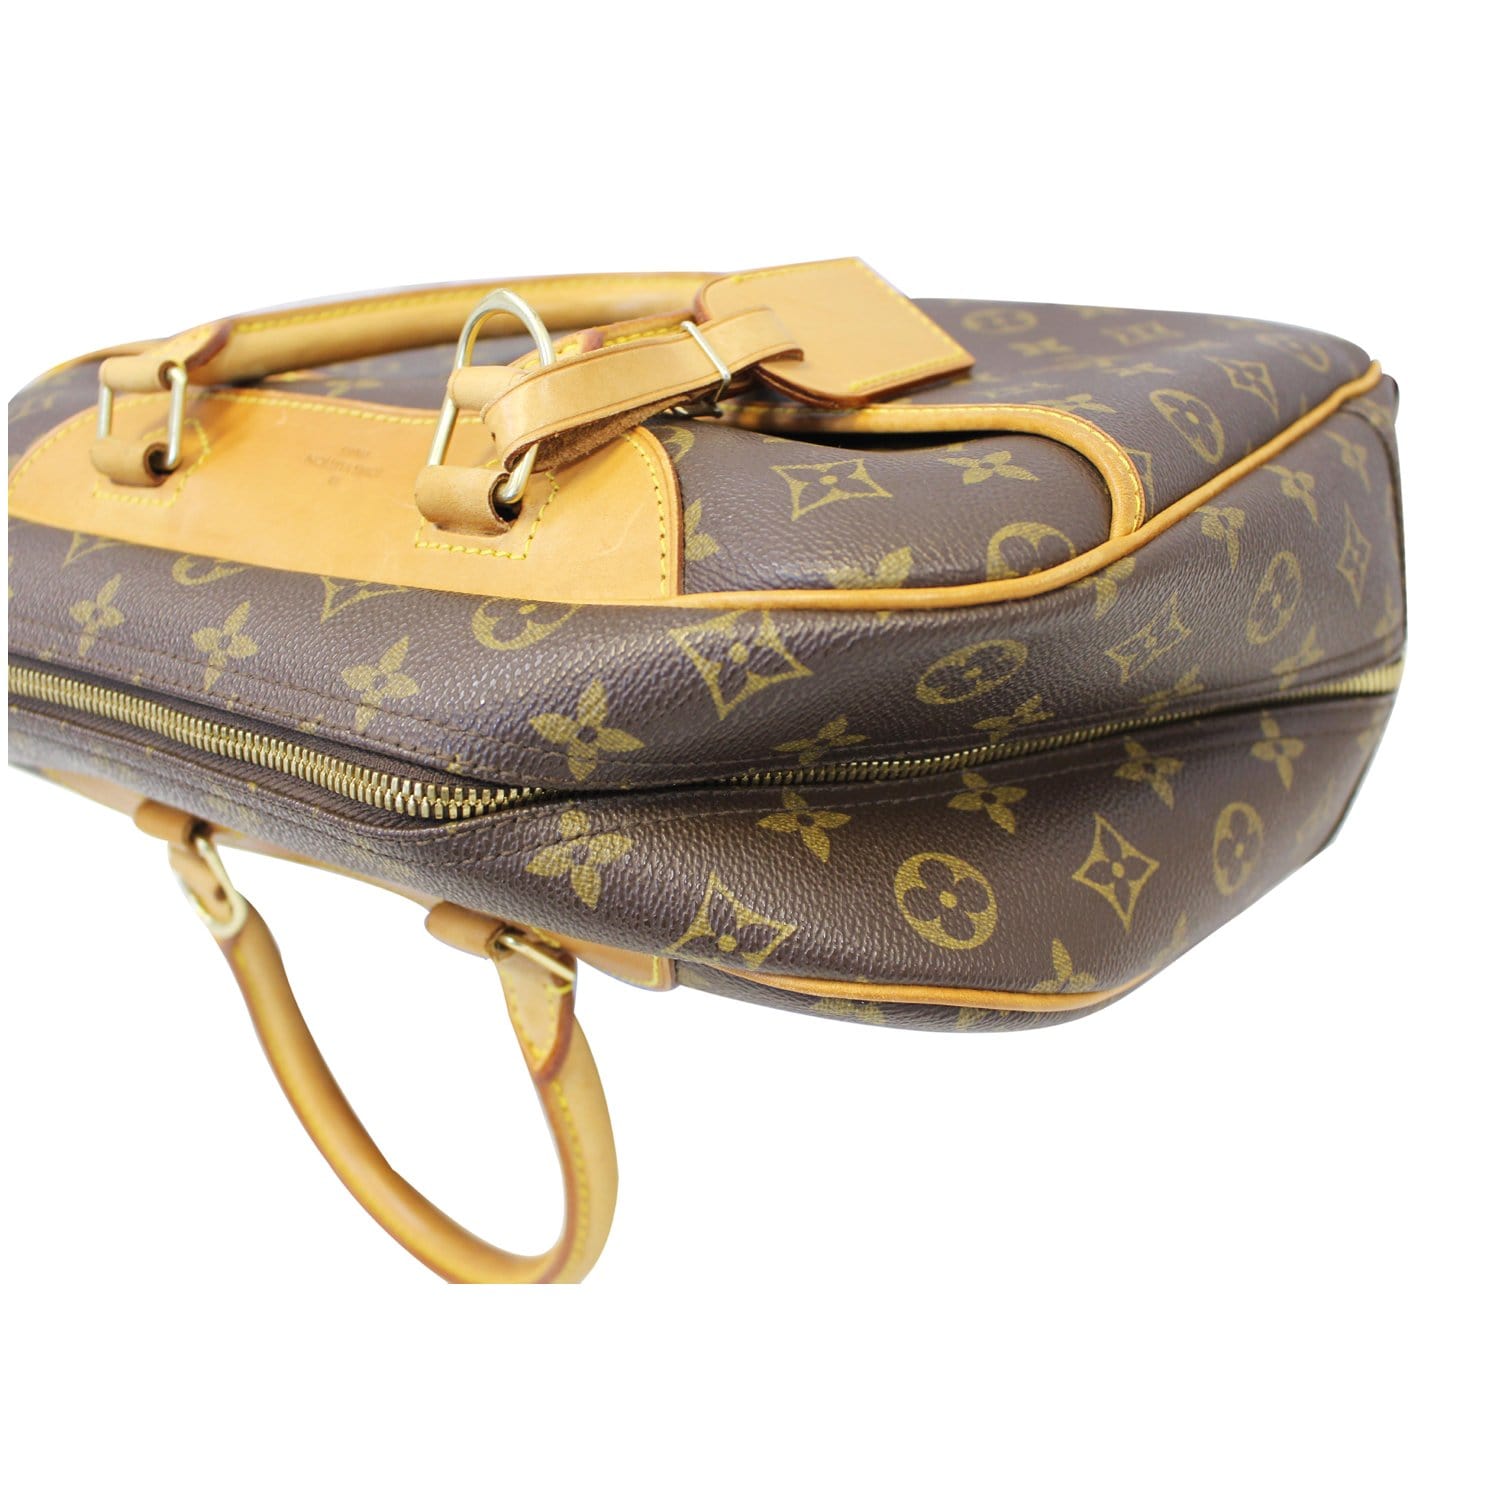 🏆 TOP 6 LOUIS VUITTON MONOGRAM BAGS YOU SHOULD ADD TO YOUR